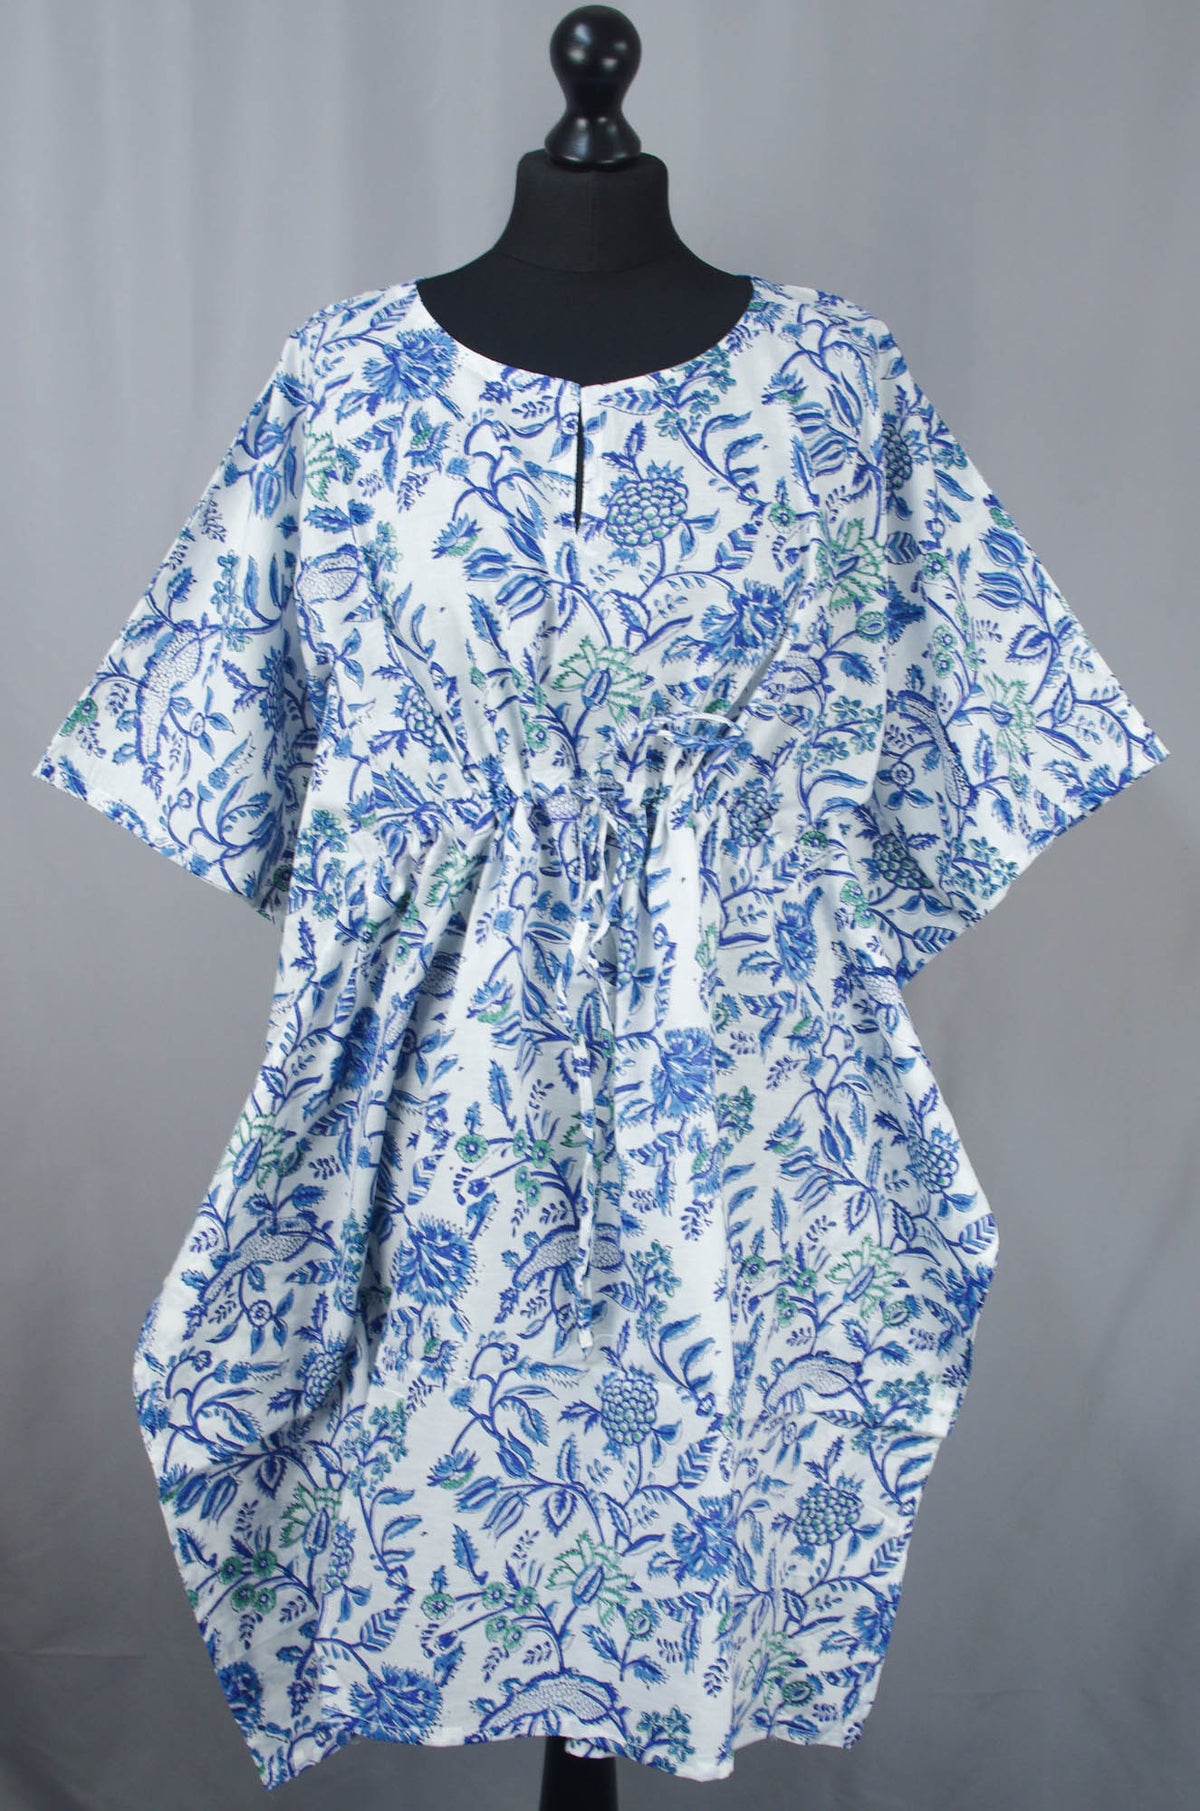 Block Printed Cotton Coverup / Kaftans - White Blue Wildflowers